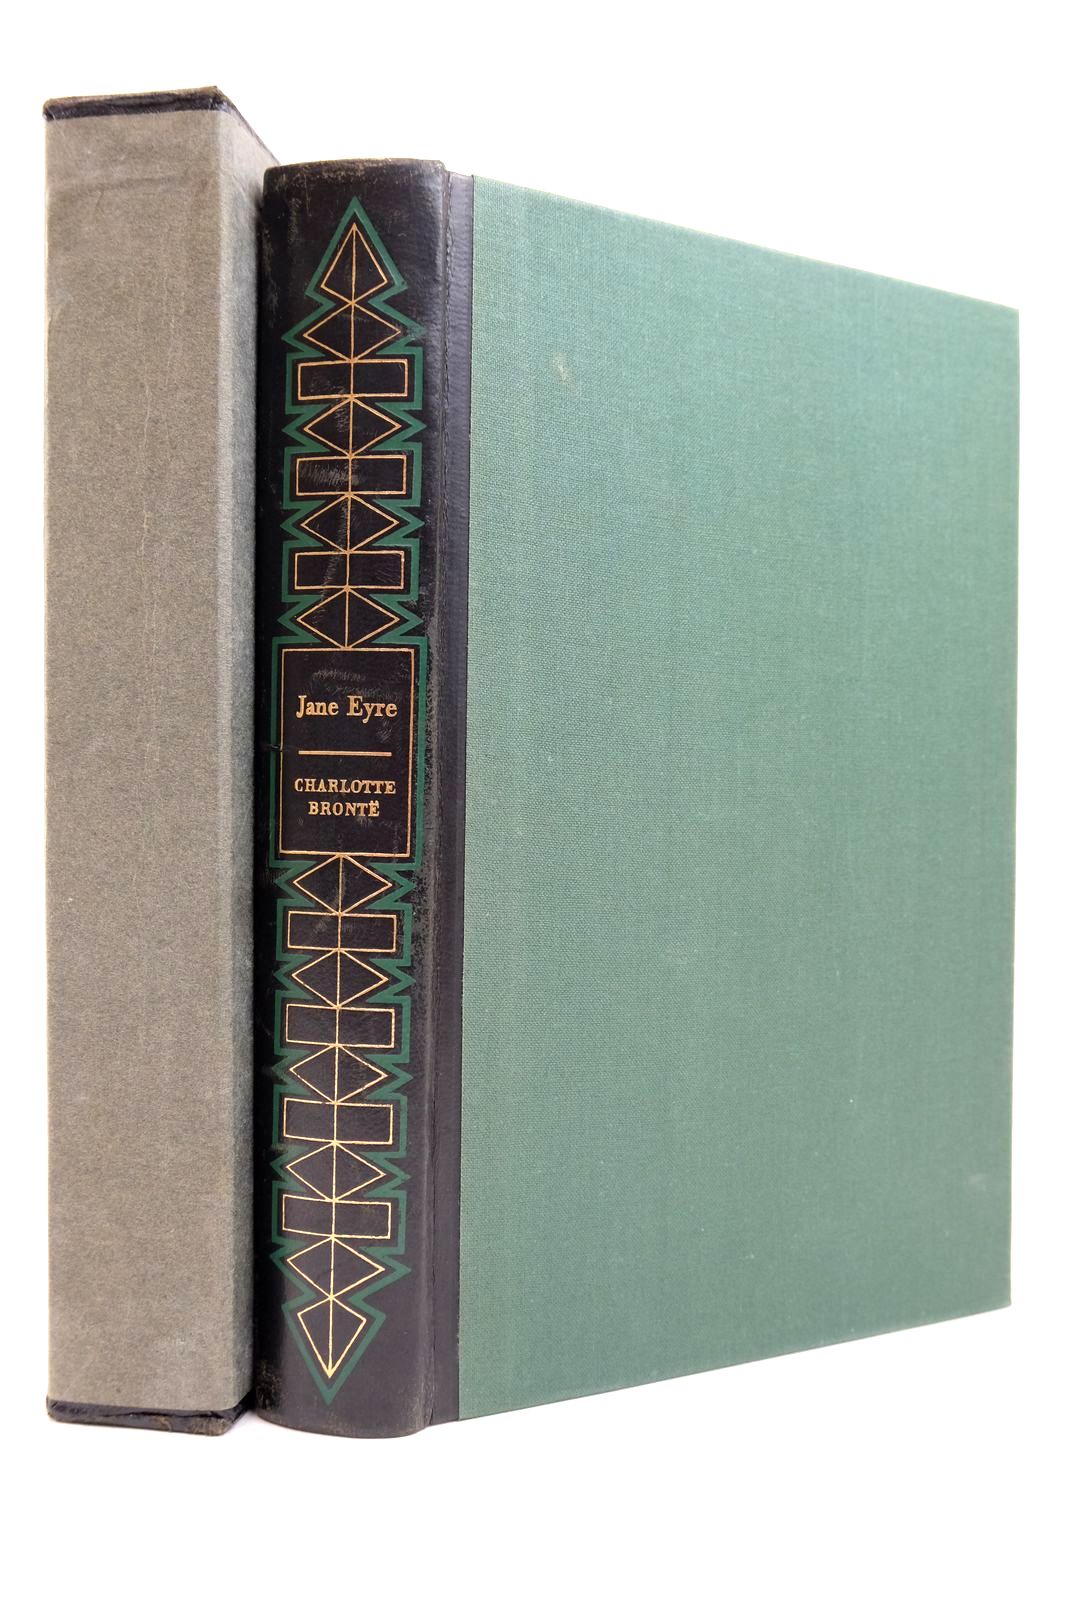 Photo of JANE EYRE written by Bronte, Charlotte illustrated by Colbert, Anthony published by Folio Society (STOCK CODE: 2139215)  for sale by Stella & Rose's Books